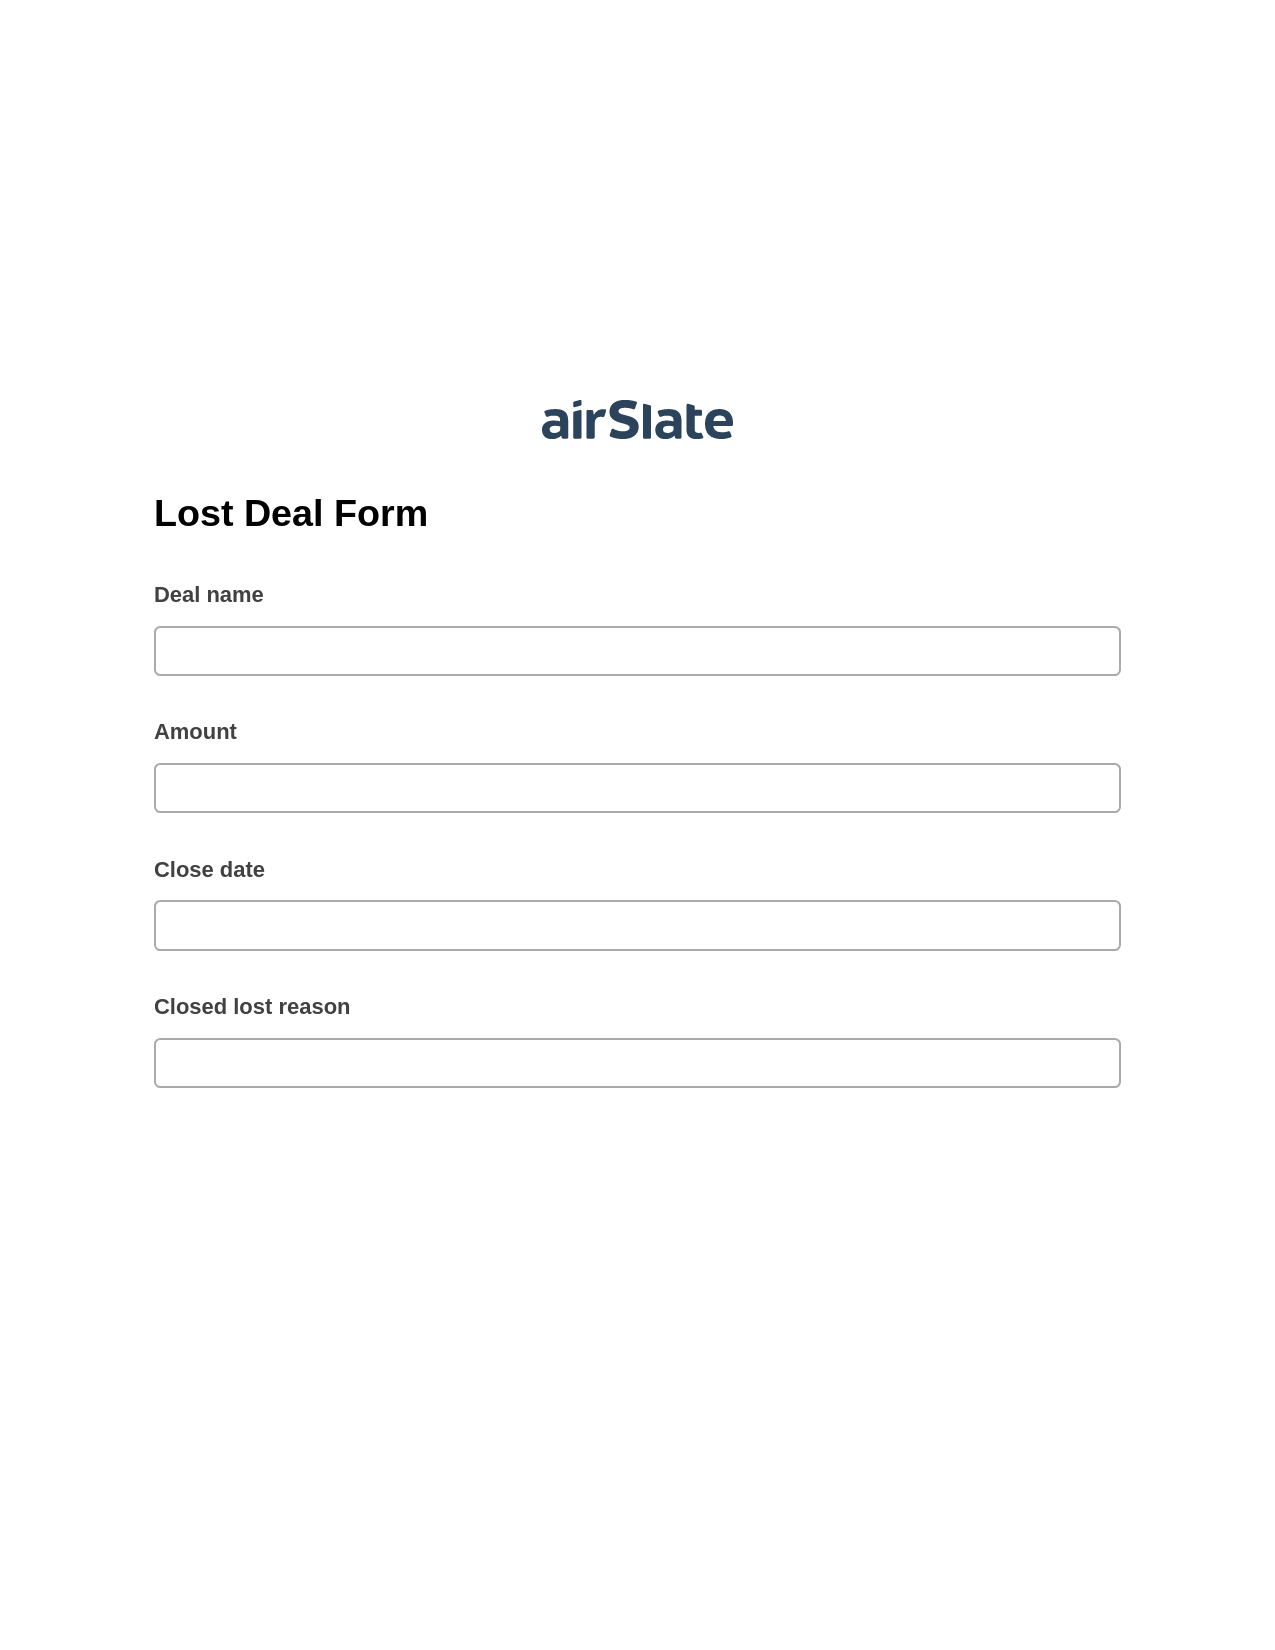 Lost Deal Form Prefill from NetSuite records, Custom Field's Value Bot, Email Notification Postfinish Bot